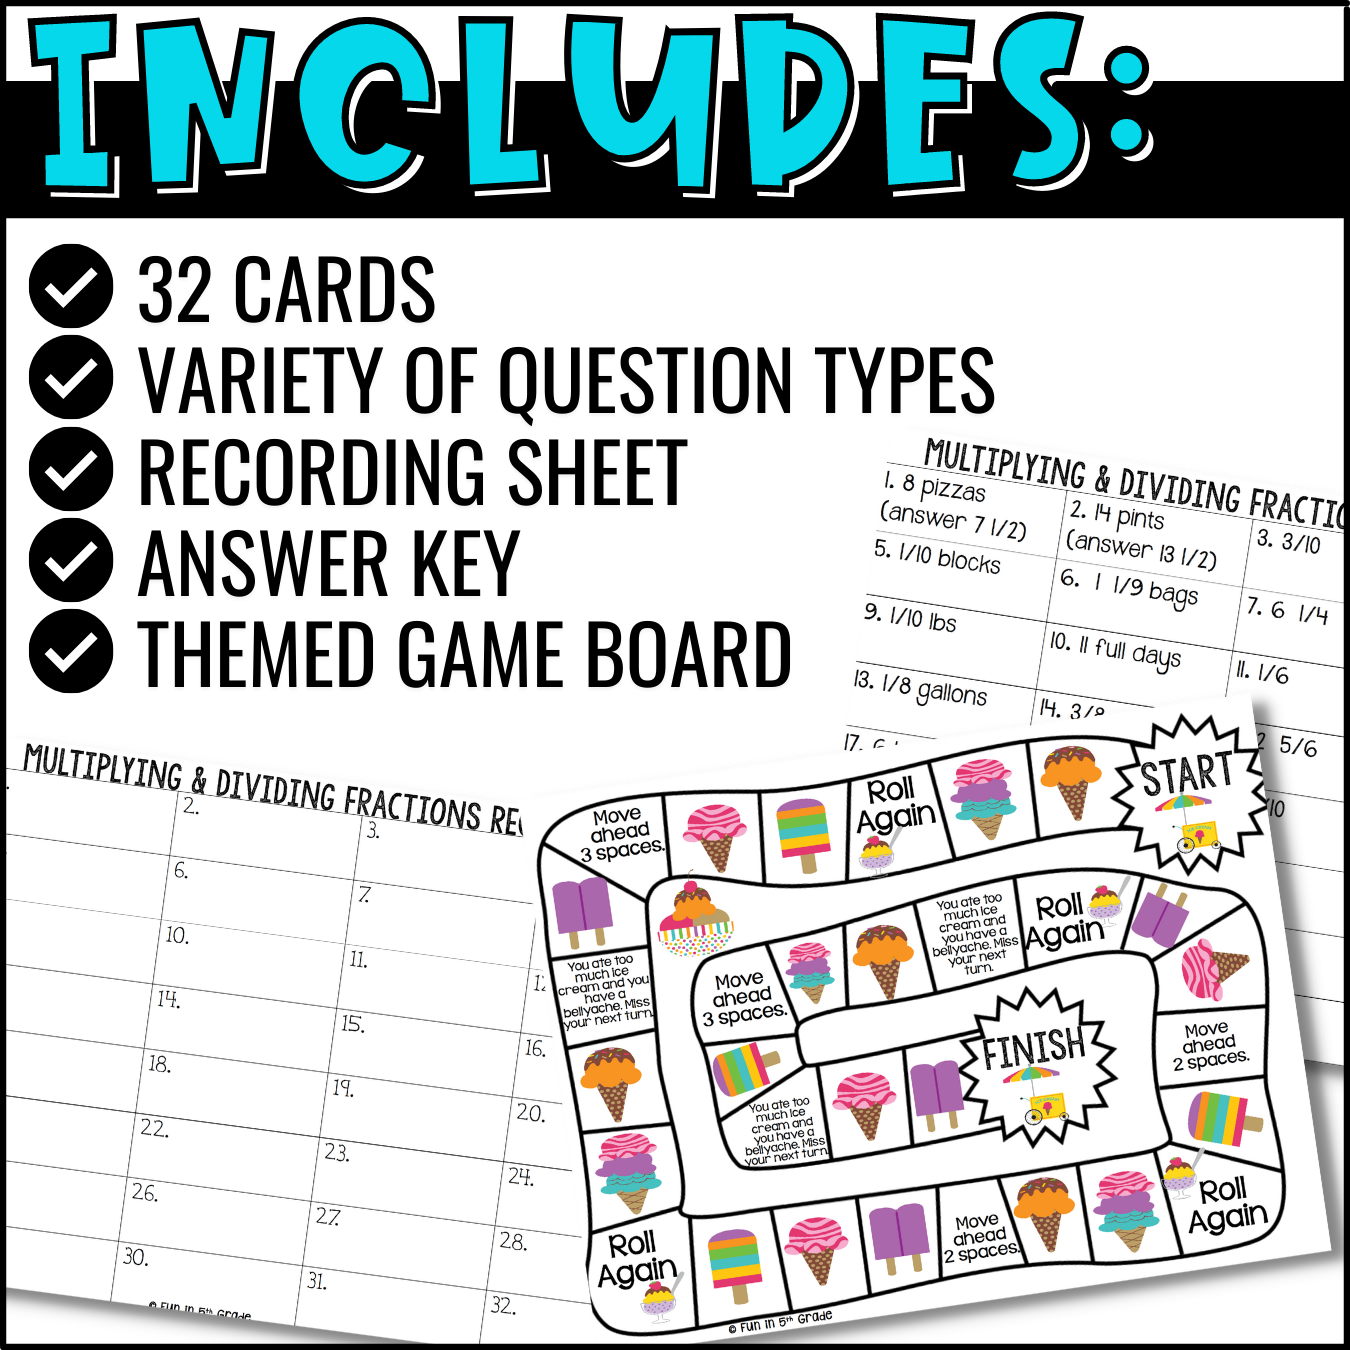 Multiply and Divide Fractions Task Cards (3)